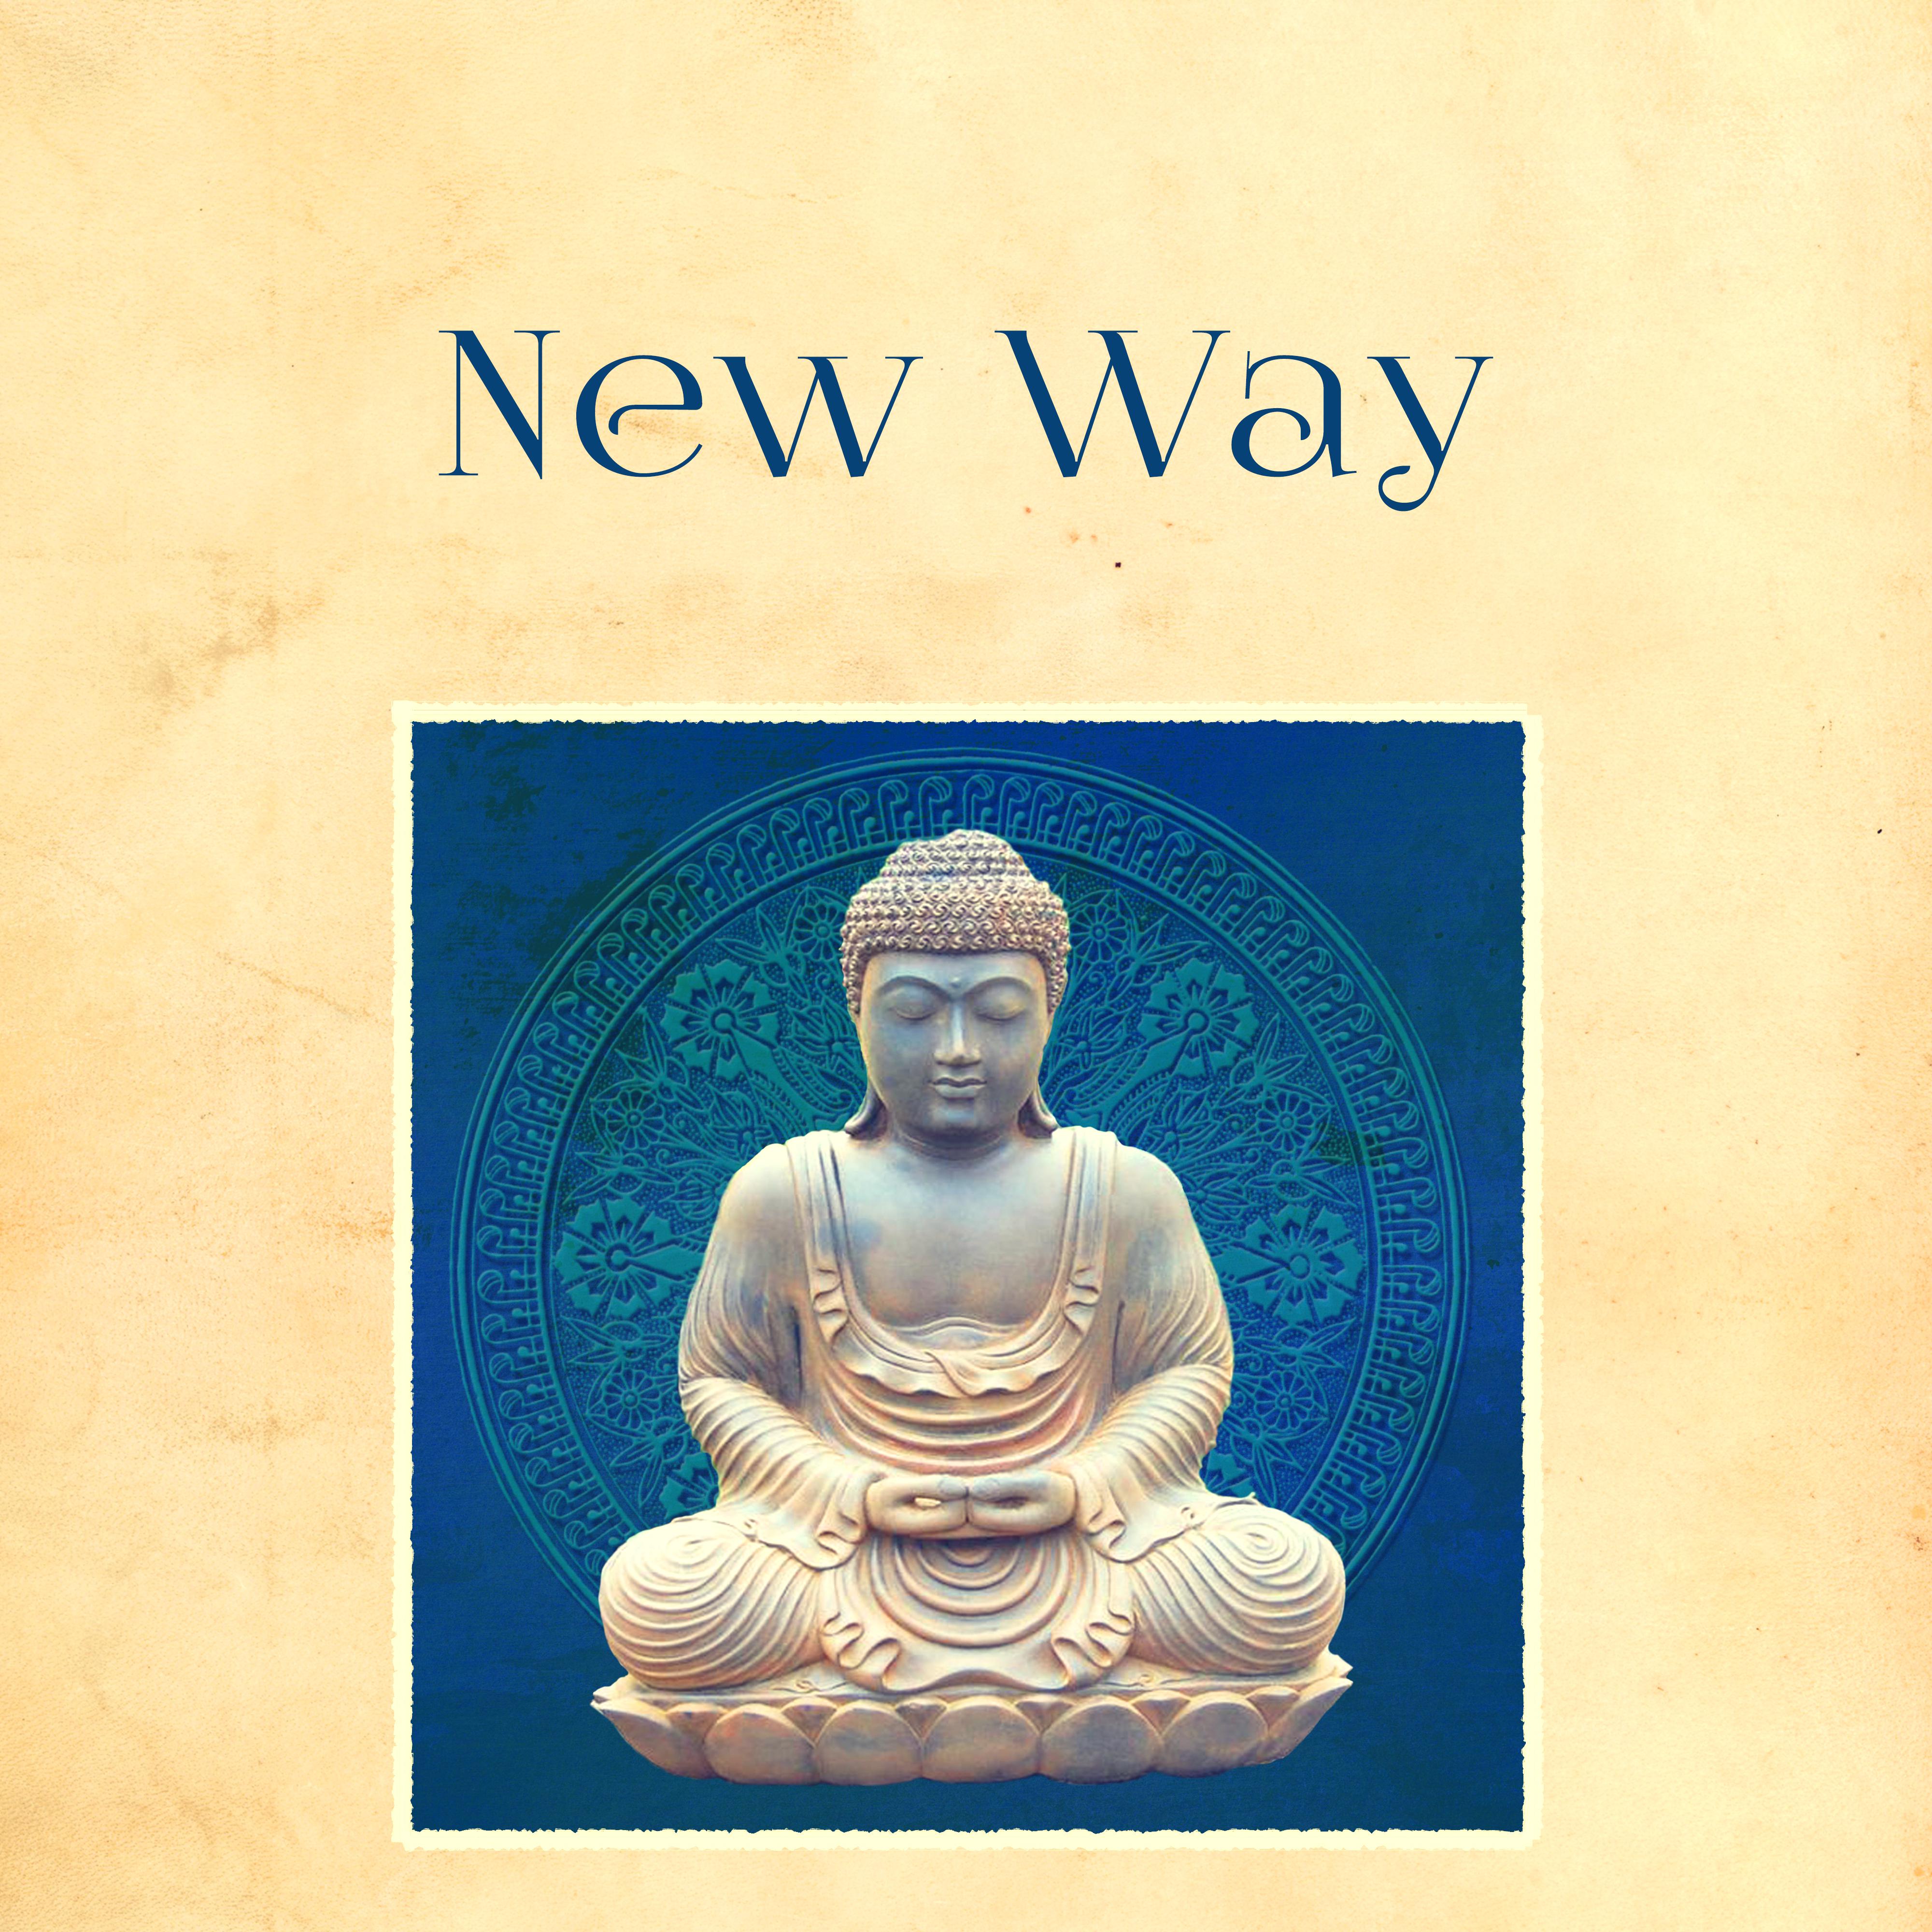 New Way - New Path, Thinking, Major Focus, Struggle for Happiness